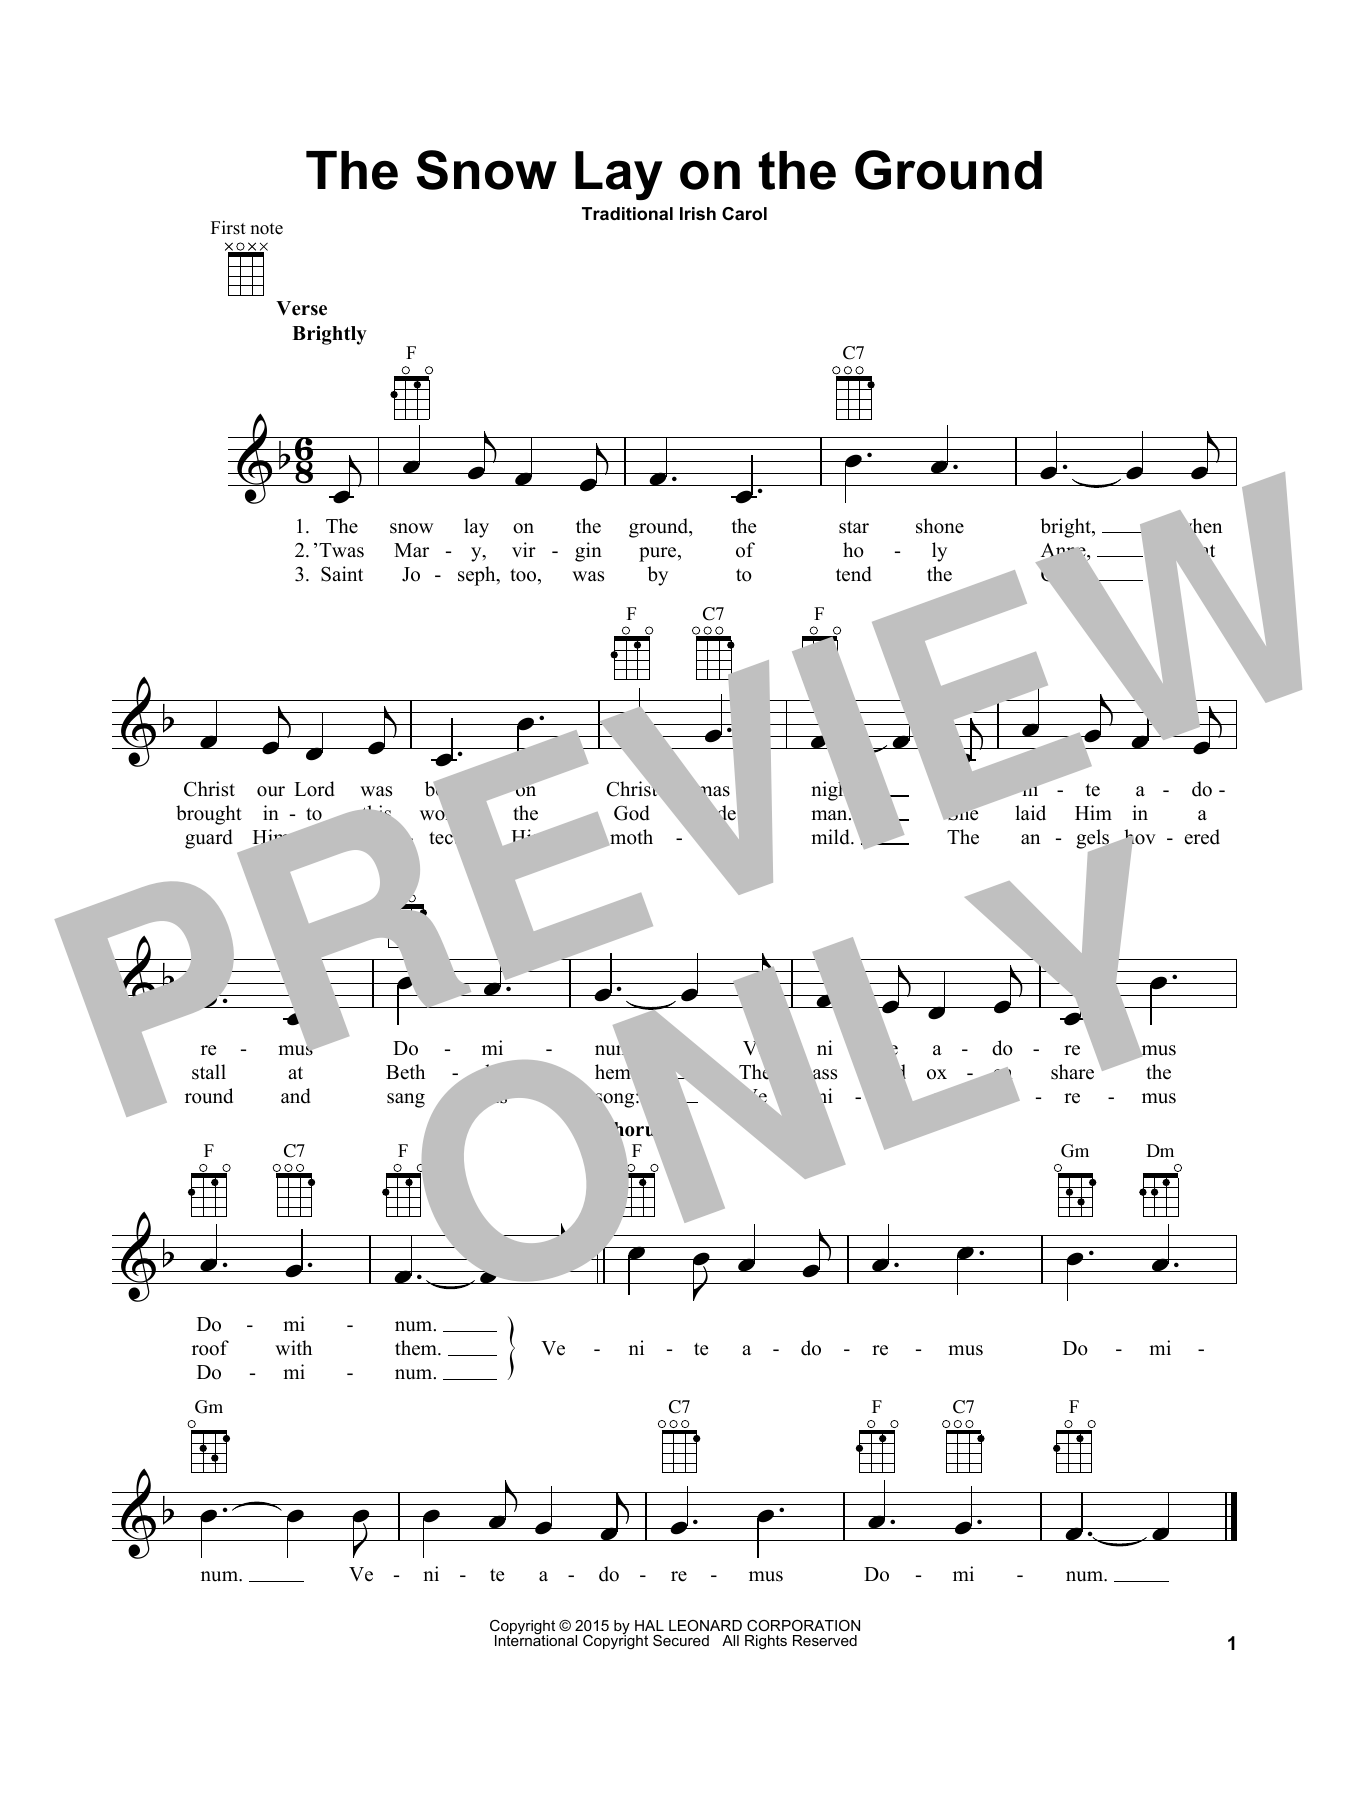 Download Traditional Irish Carol The Snow Lay On The Ground Sheet Music